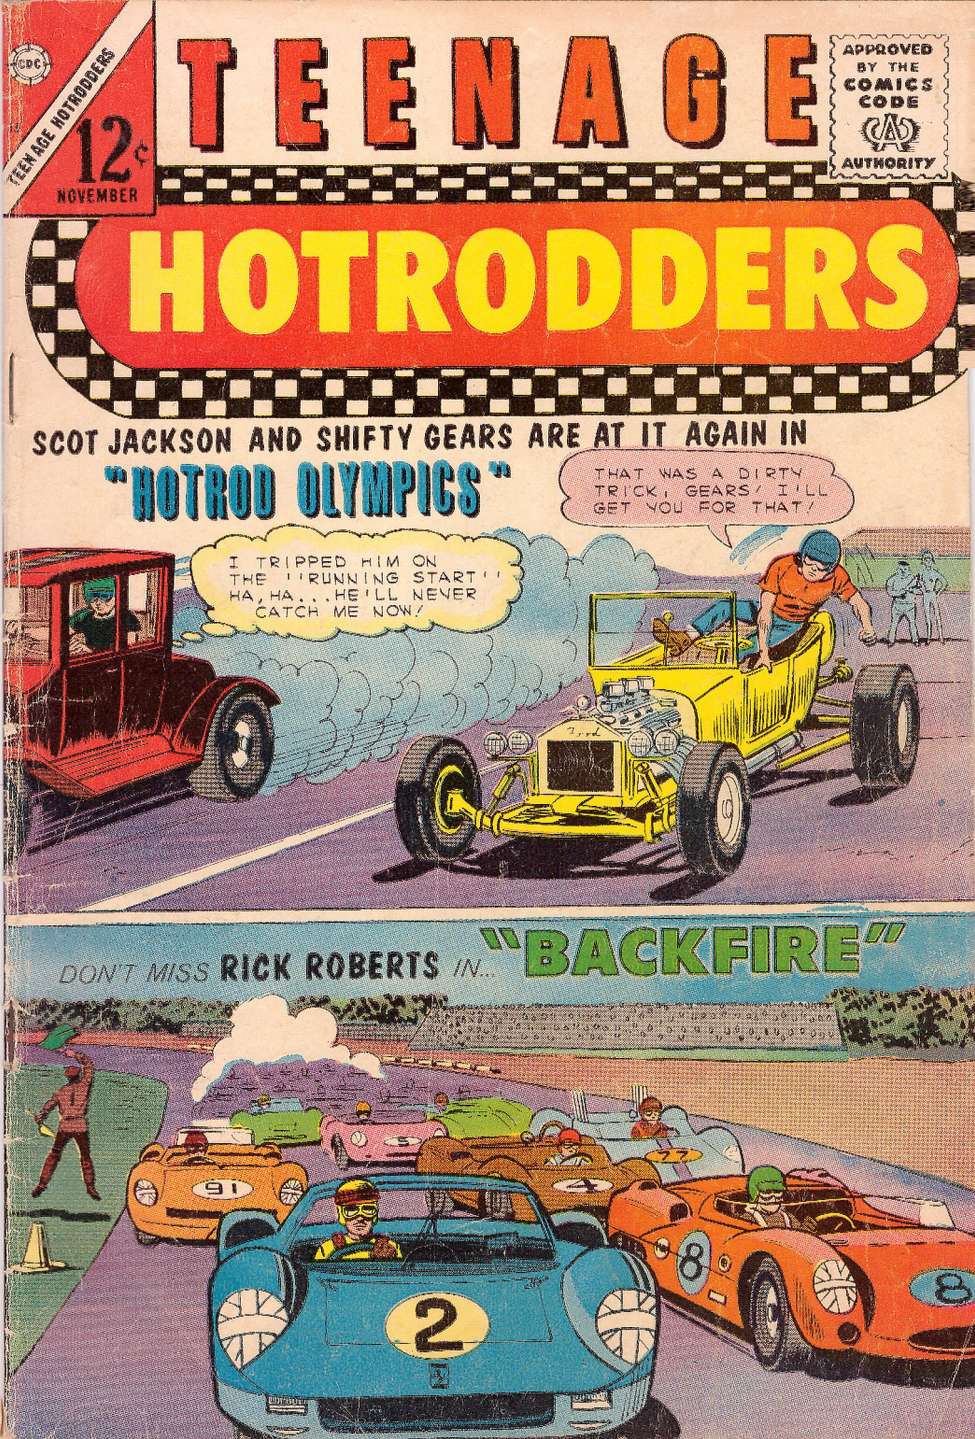 Book Cover For Teenage Hotrodders 15